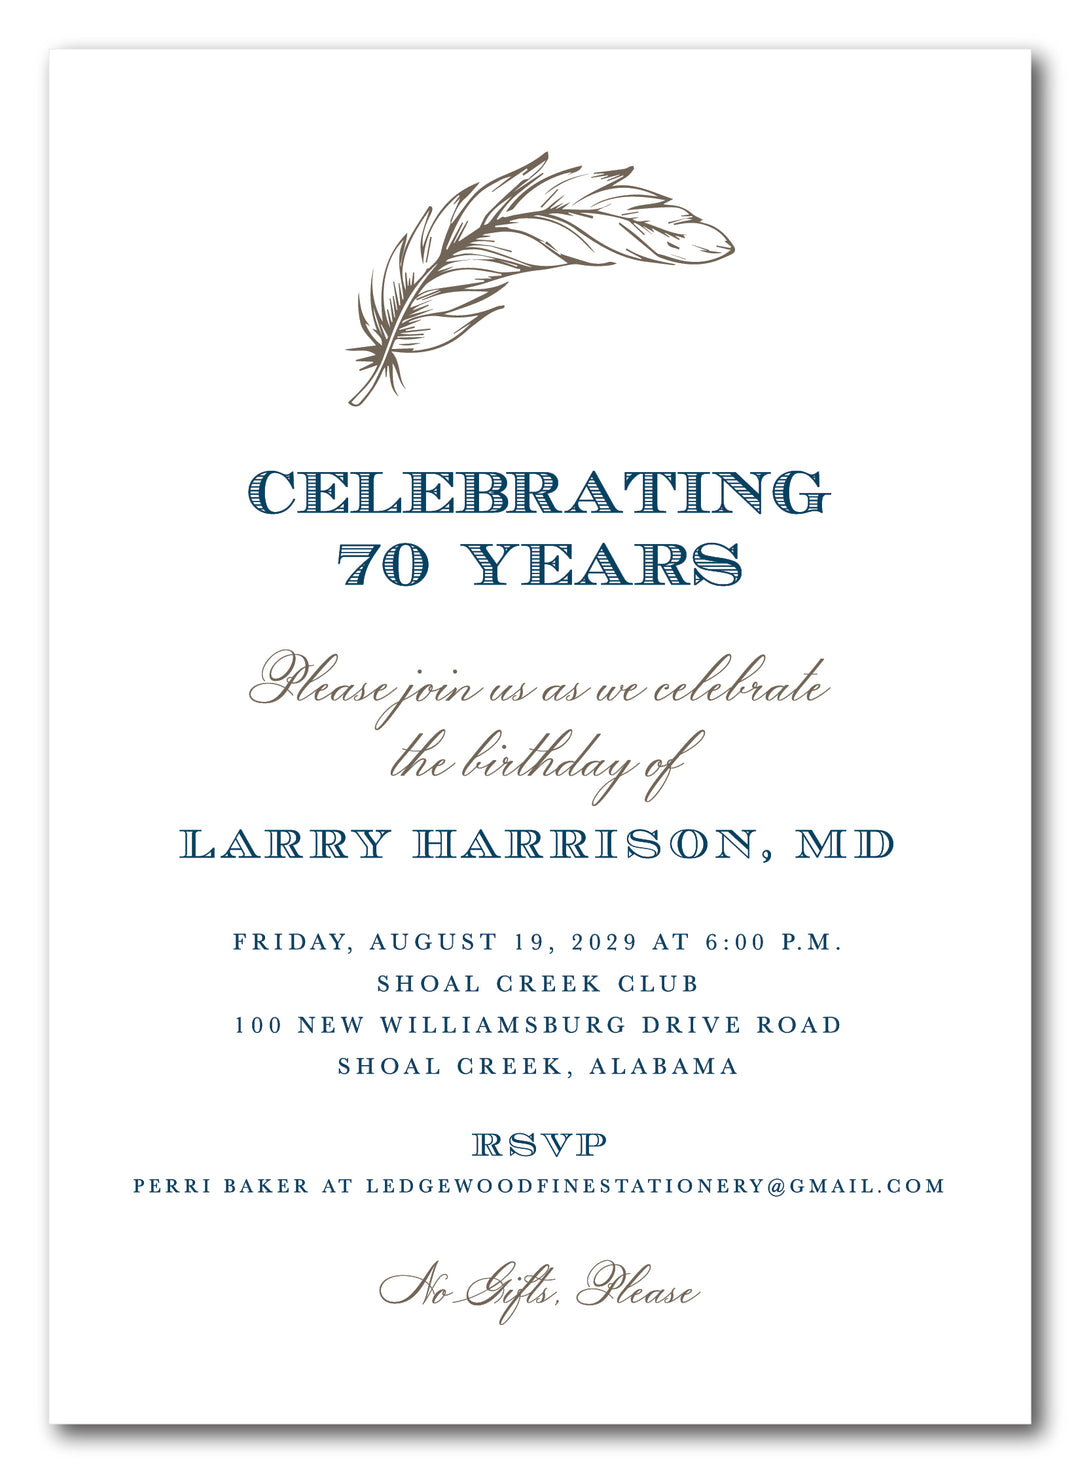 The Feather Birthday Party Invitation